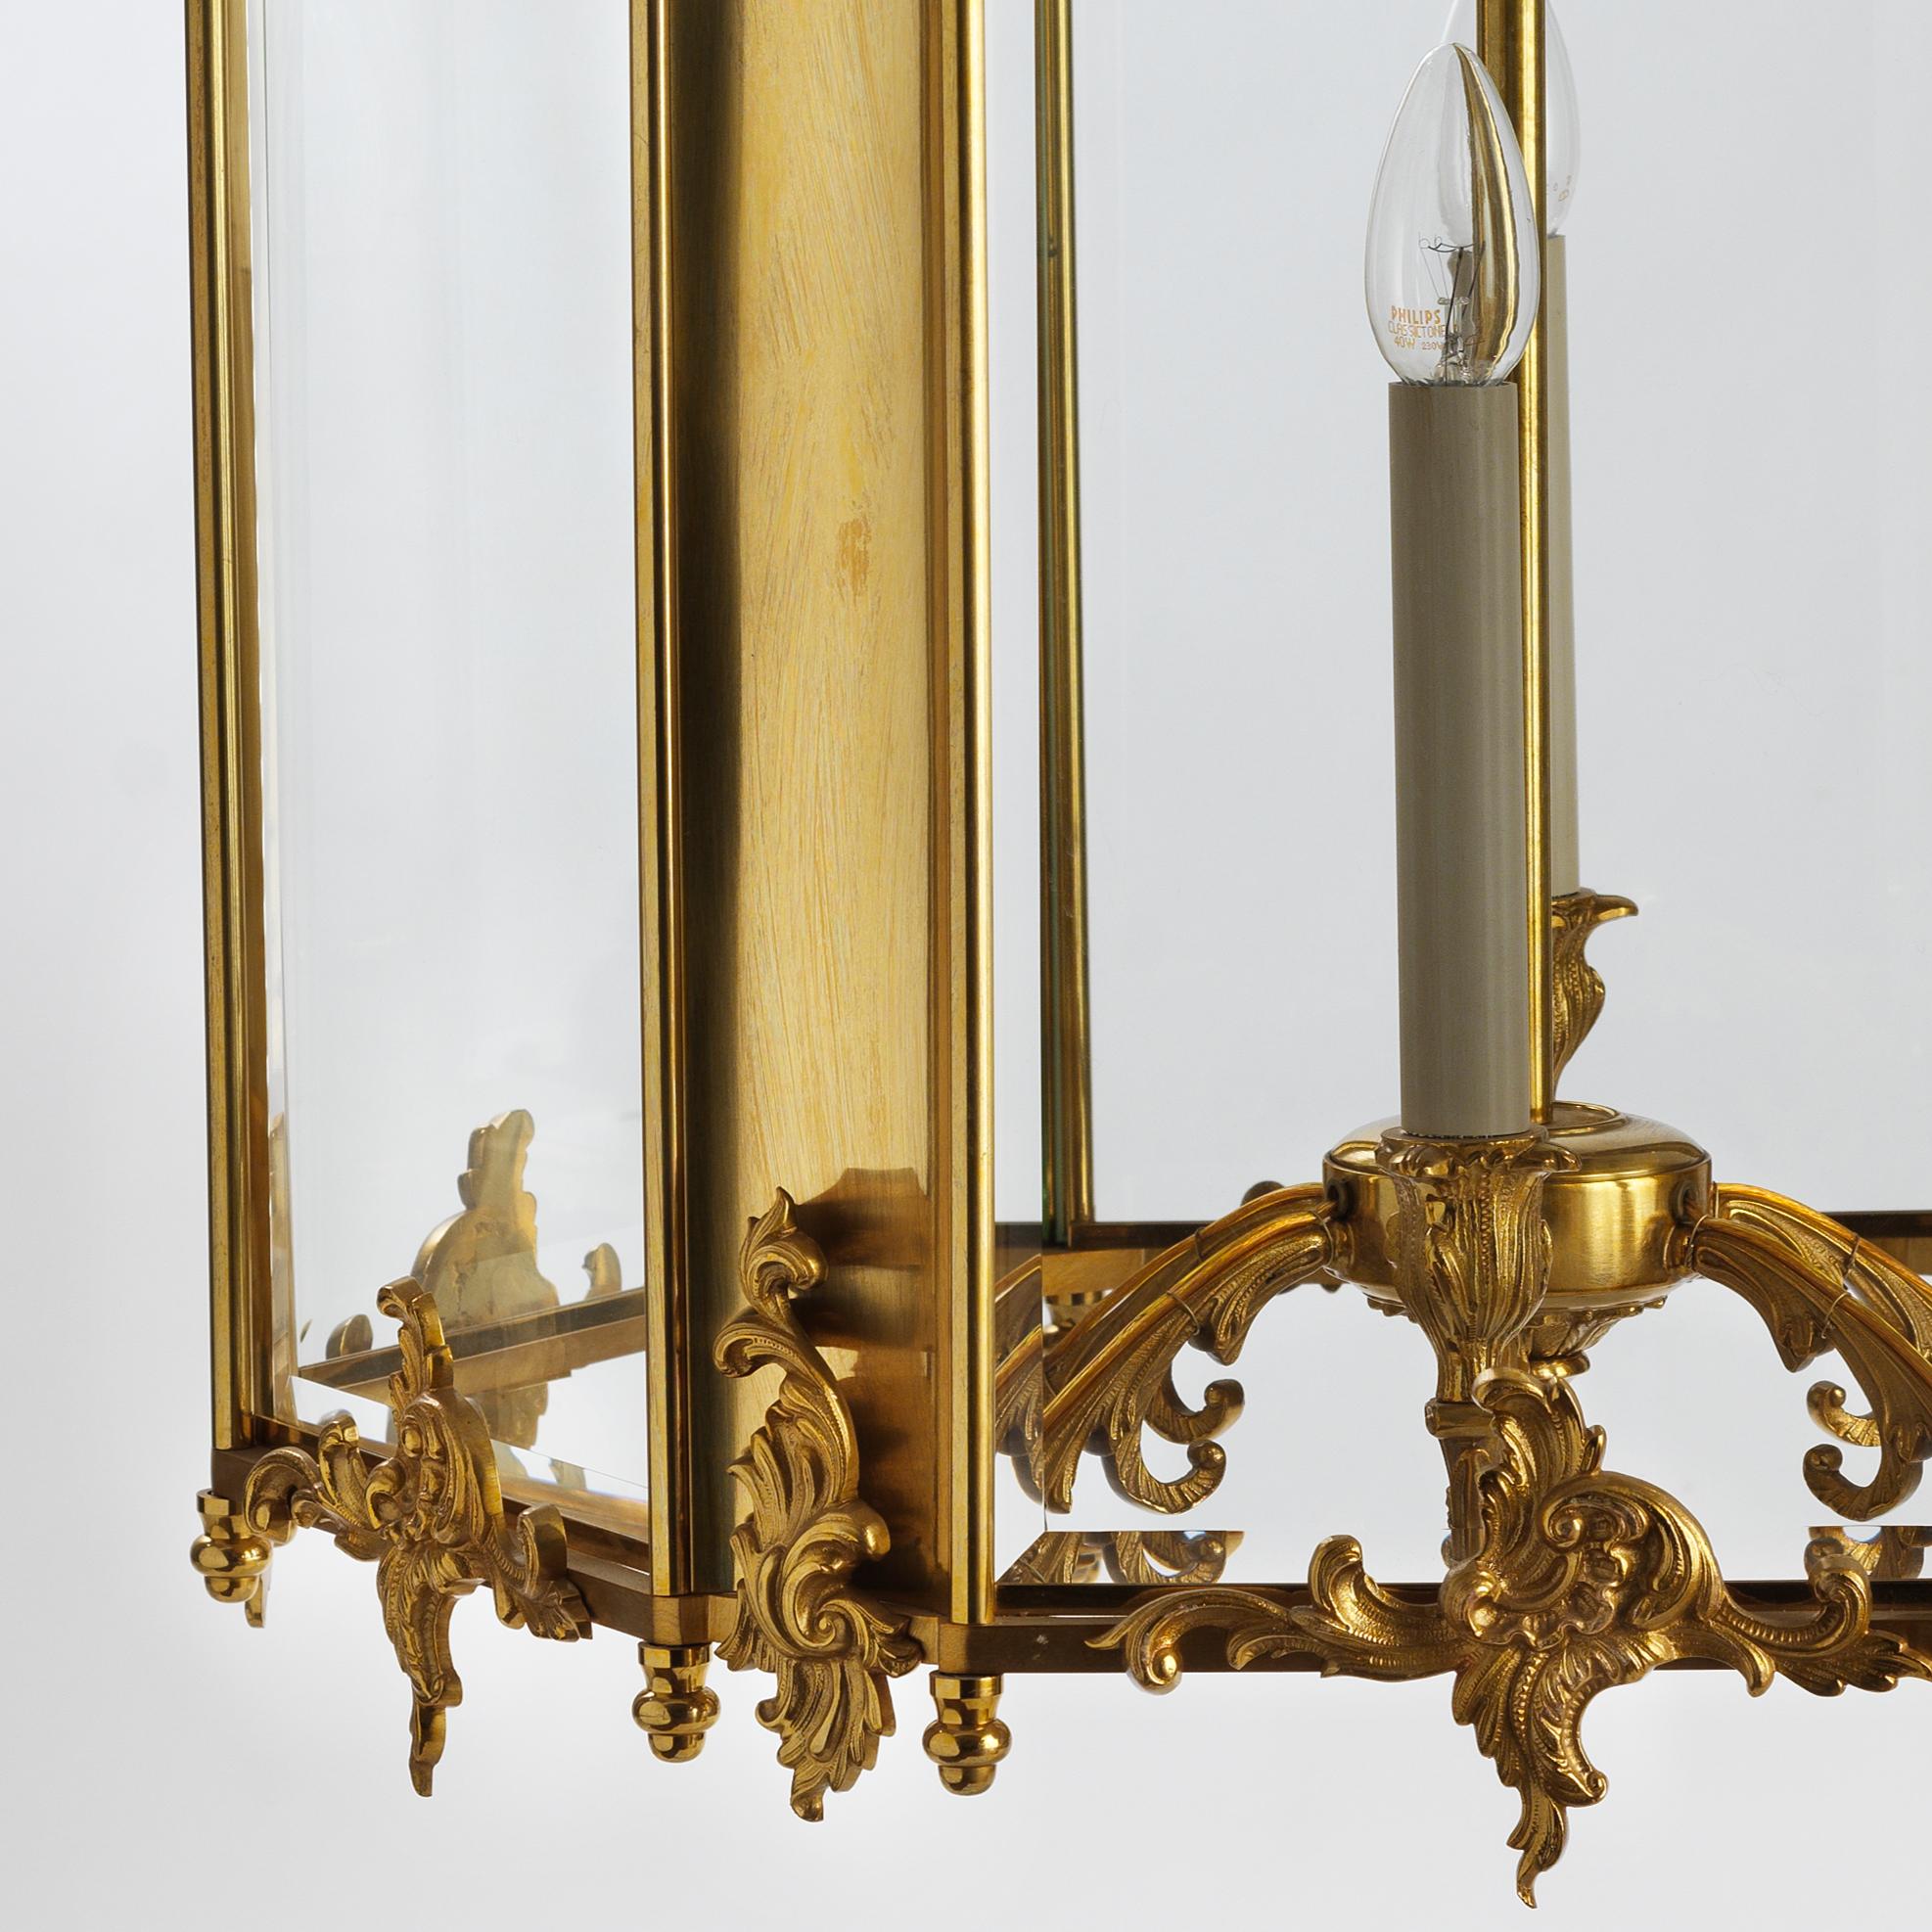 This finely chiseled French Rococo style gilt bronze lantern by Gherardo Degli Albizzi  has six lights and it shows classical features of that period such acanthus leaves and vegetal decoration all over.
Foliate crown stay above the six leafy arms